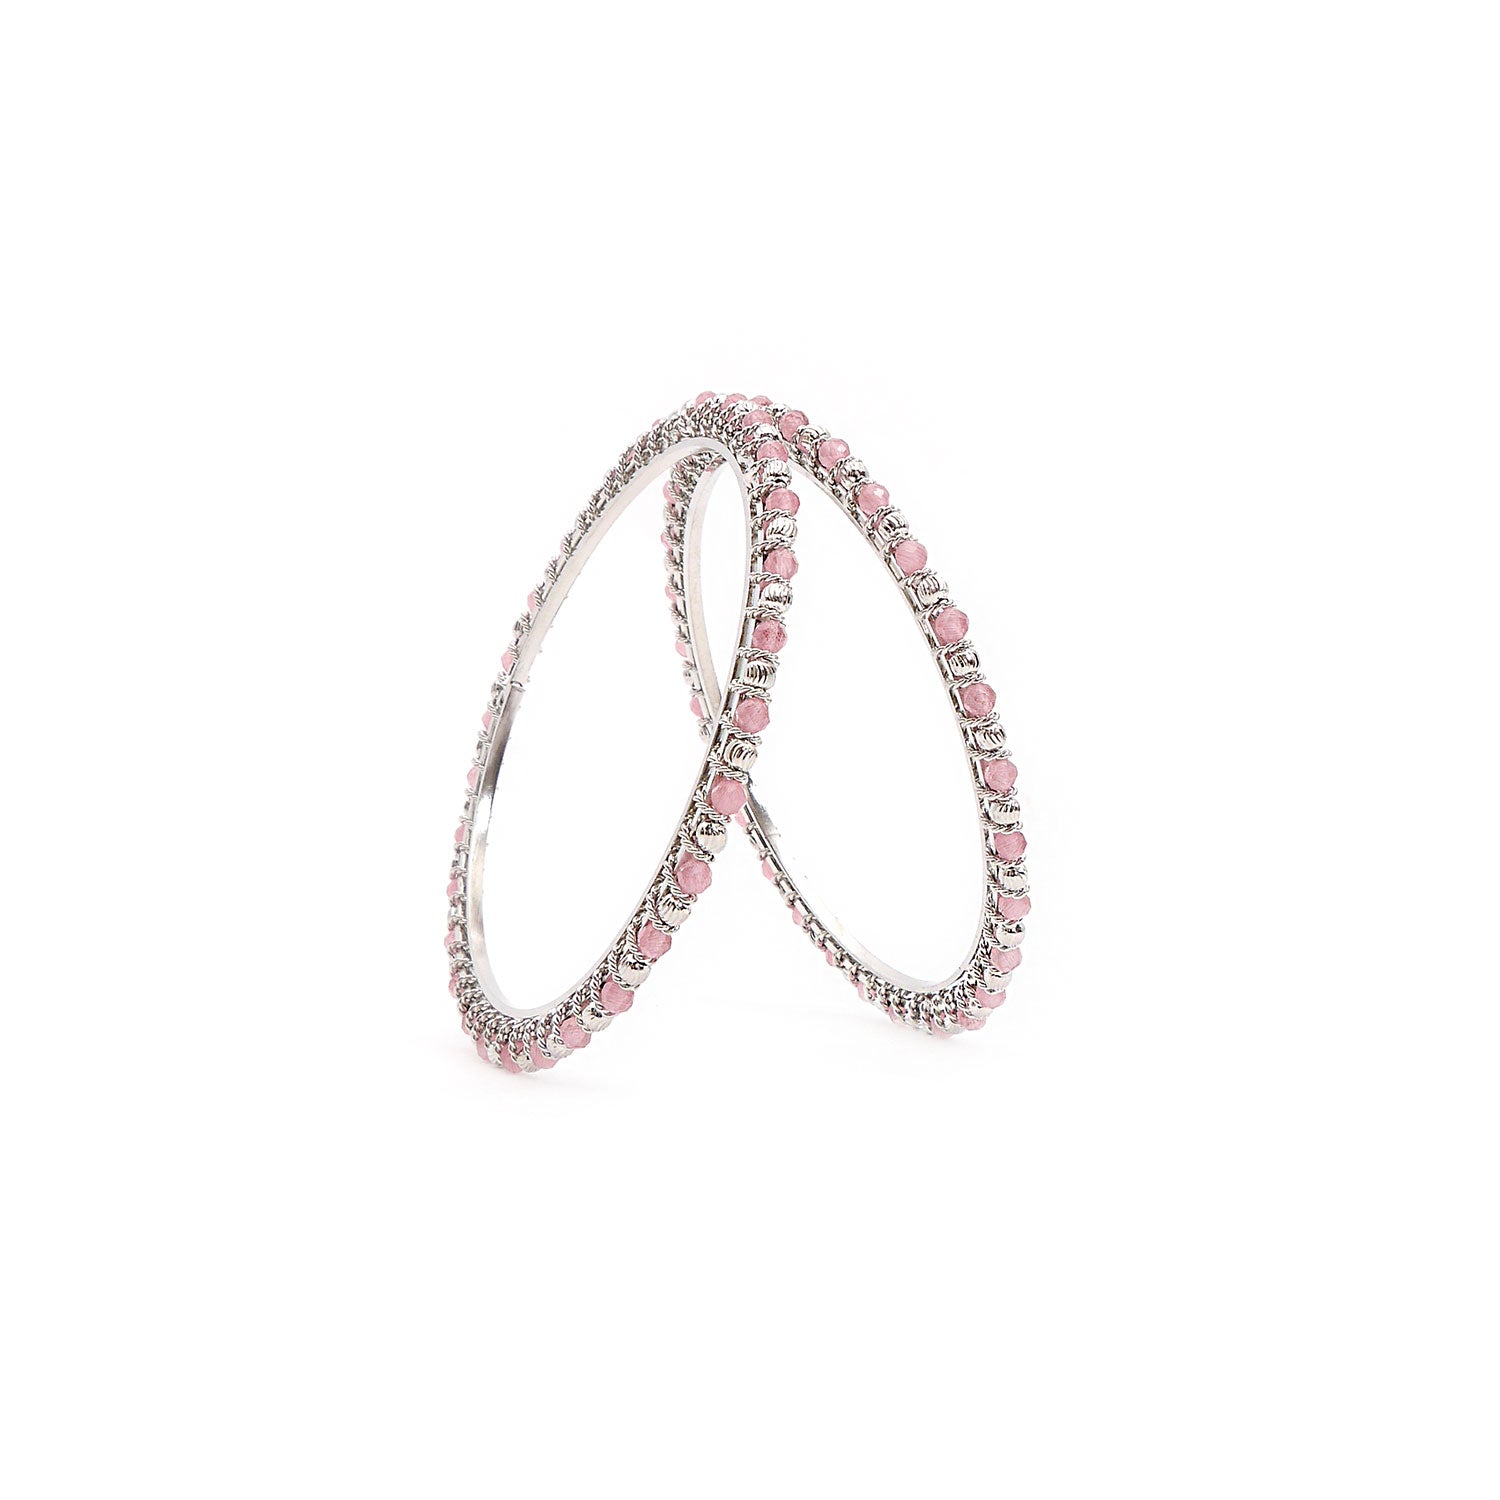 Pink and Silver Crystal Beaded Bangles